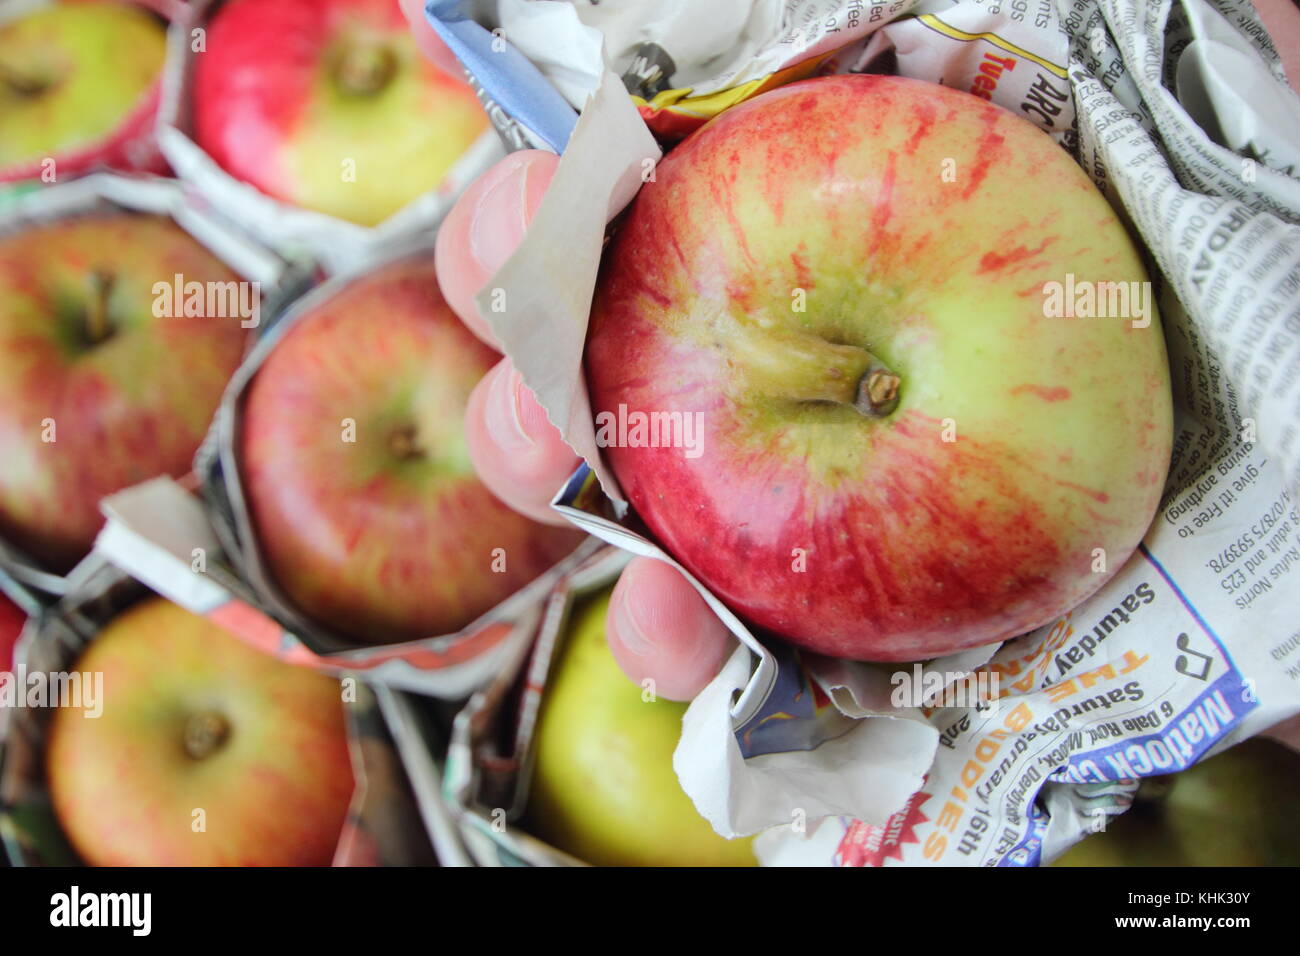 Fresh apples (malus domestica) individually wrapped in newspaper and stored in wooden tray to help prevent rotting during storage Stock Photo